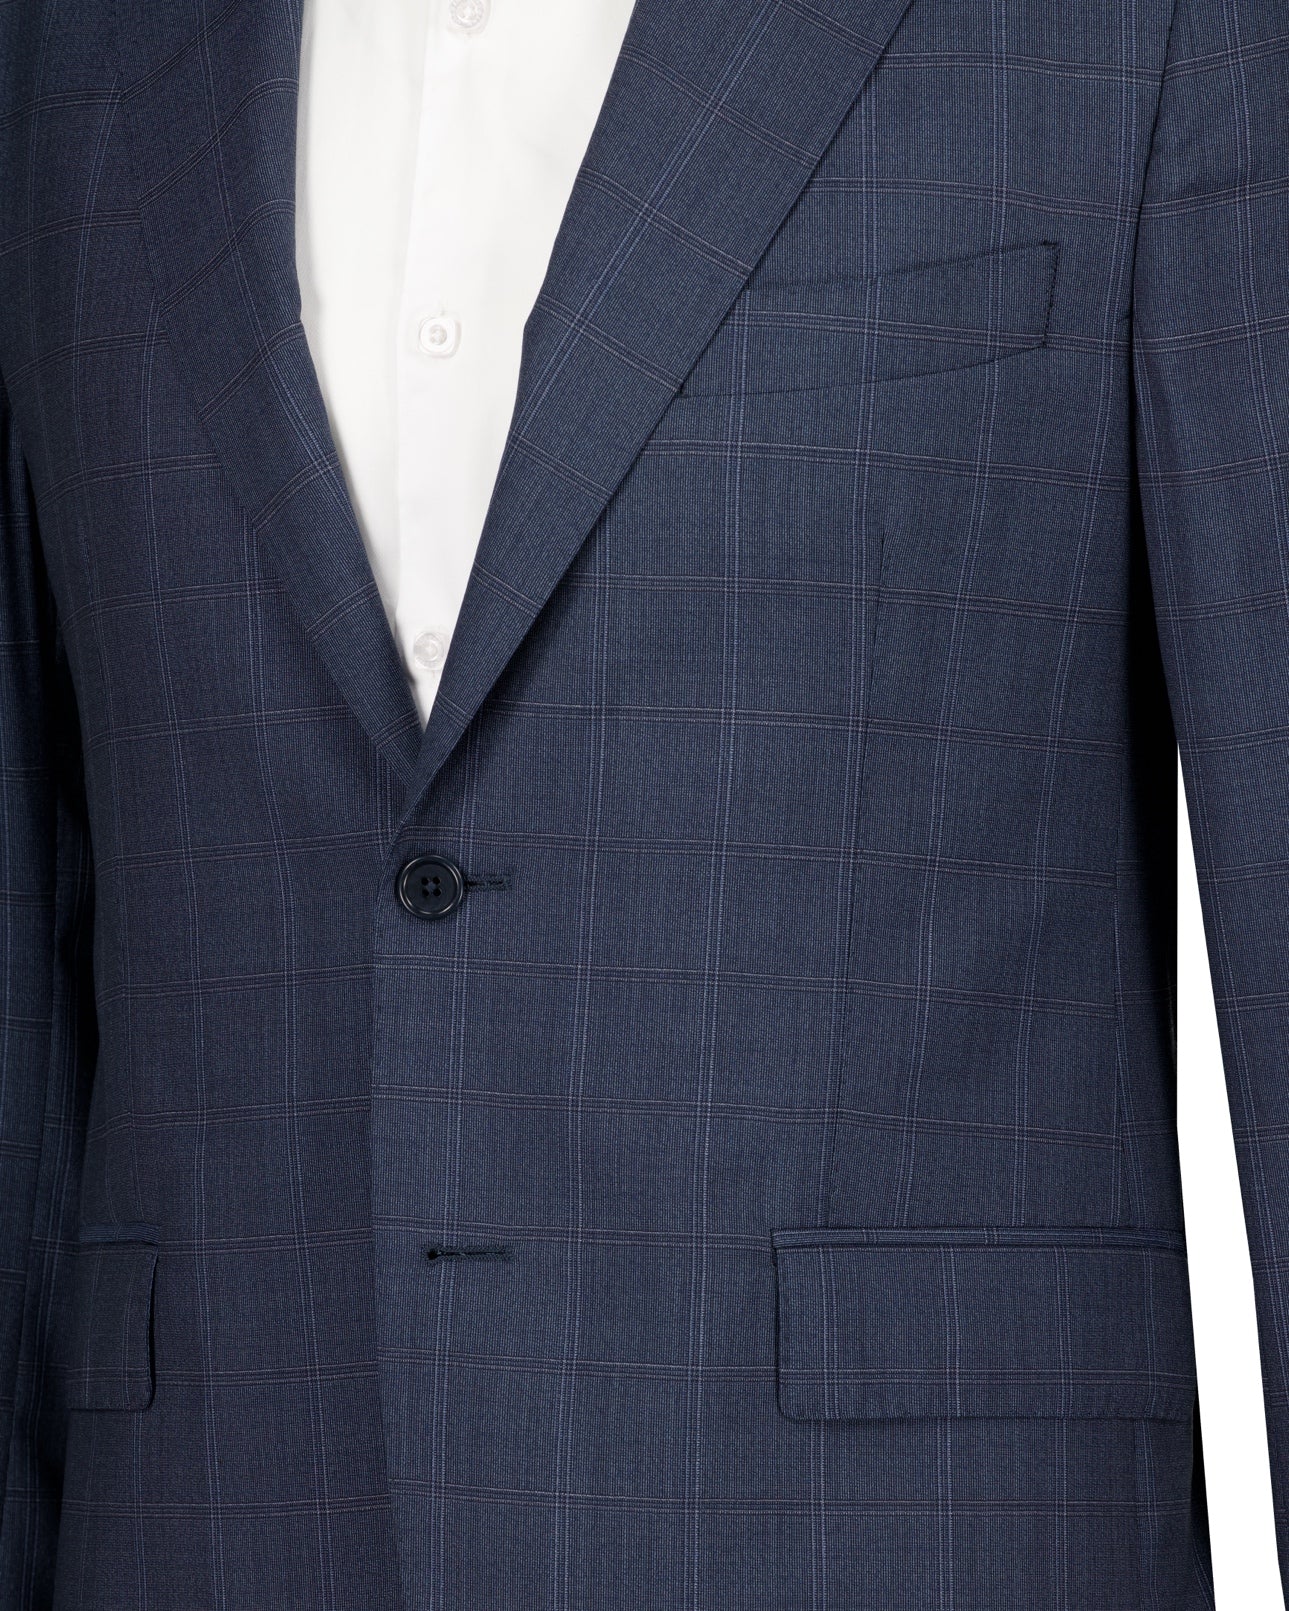 Bateman Zegna Cloth Suit - Navy - Made in Italy